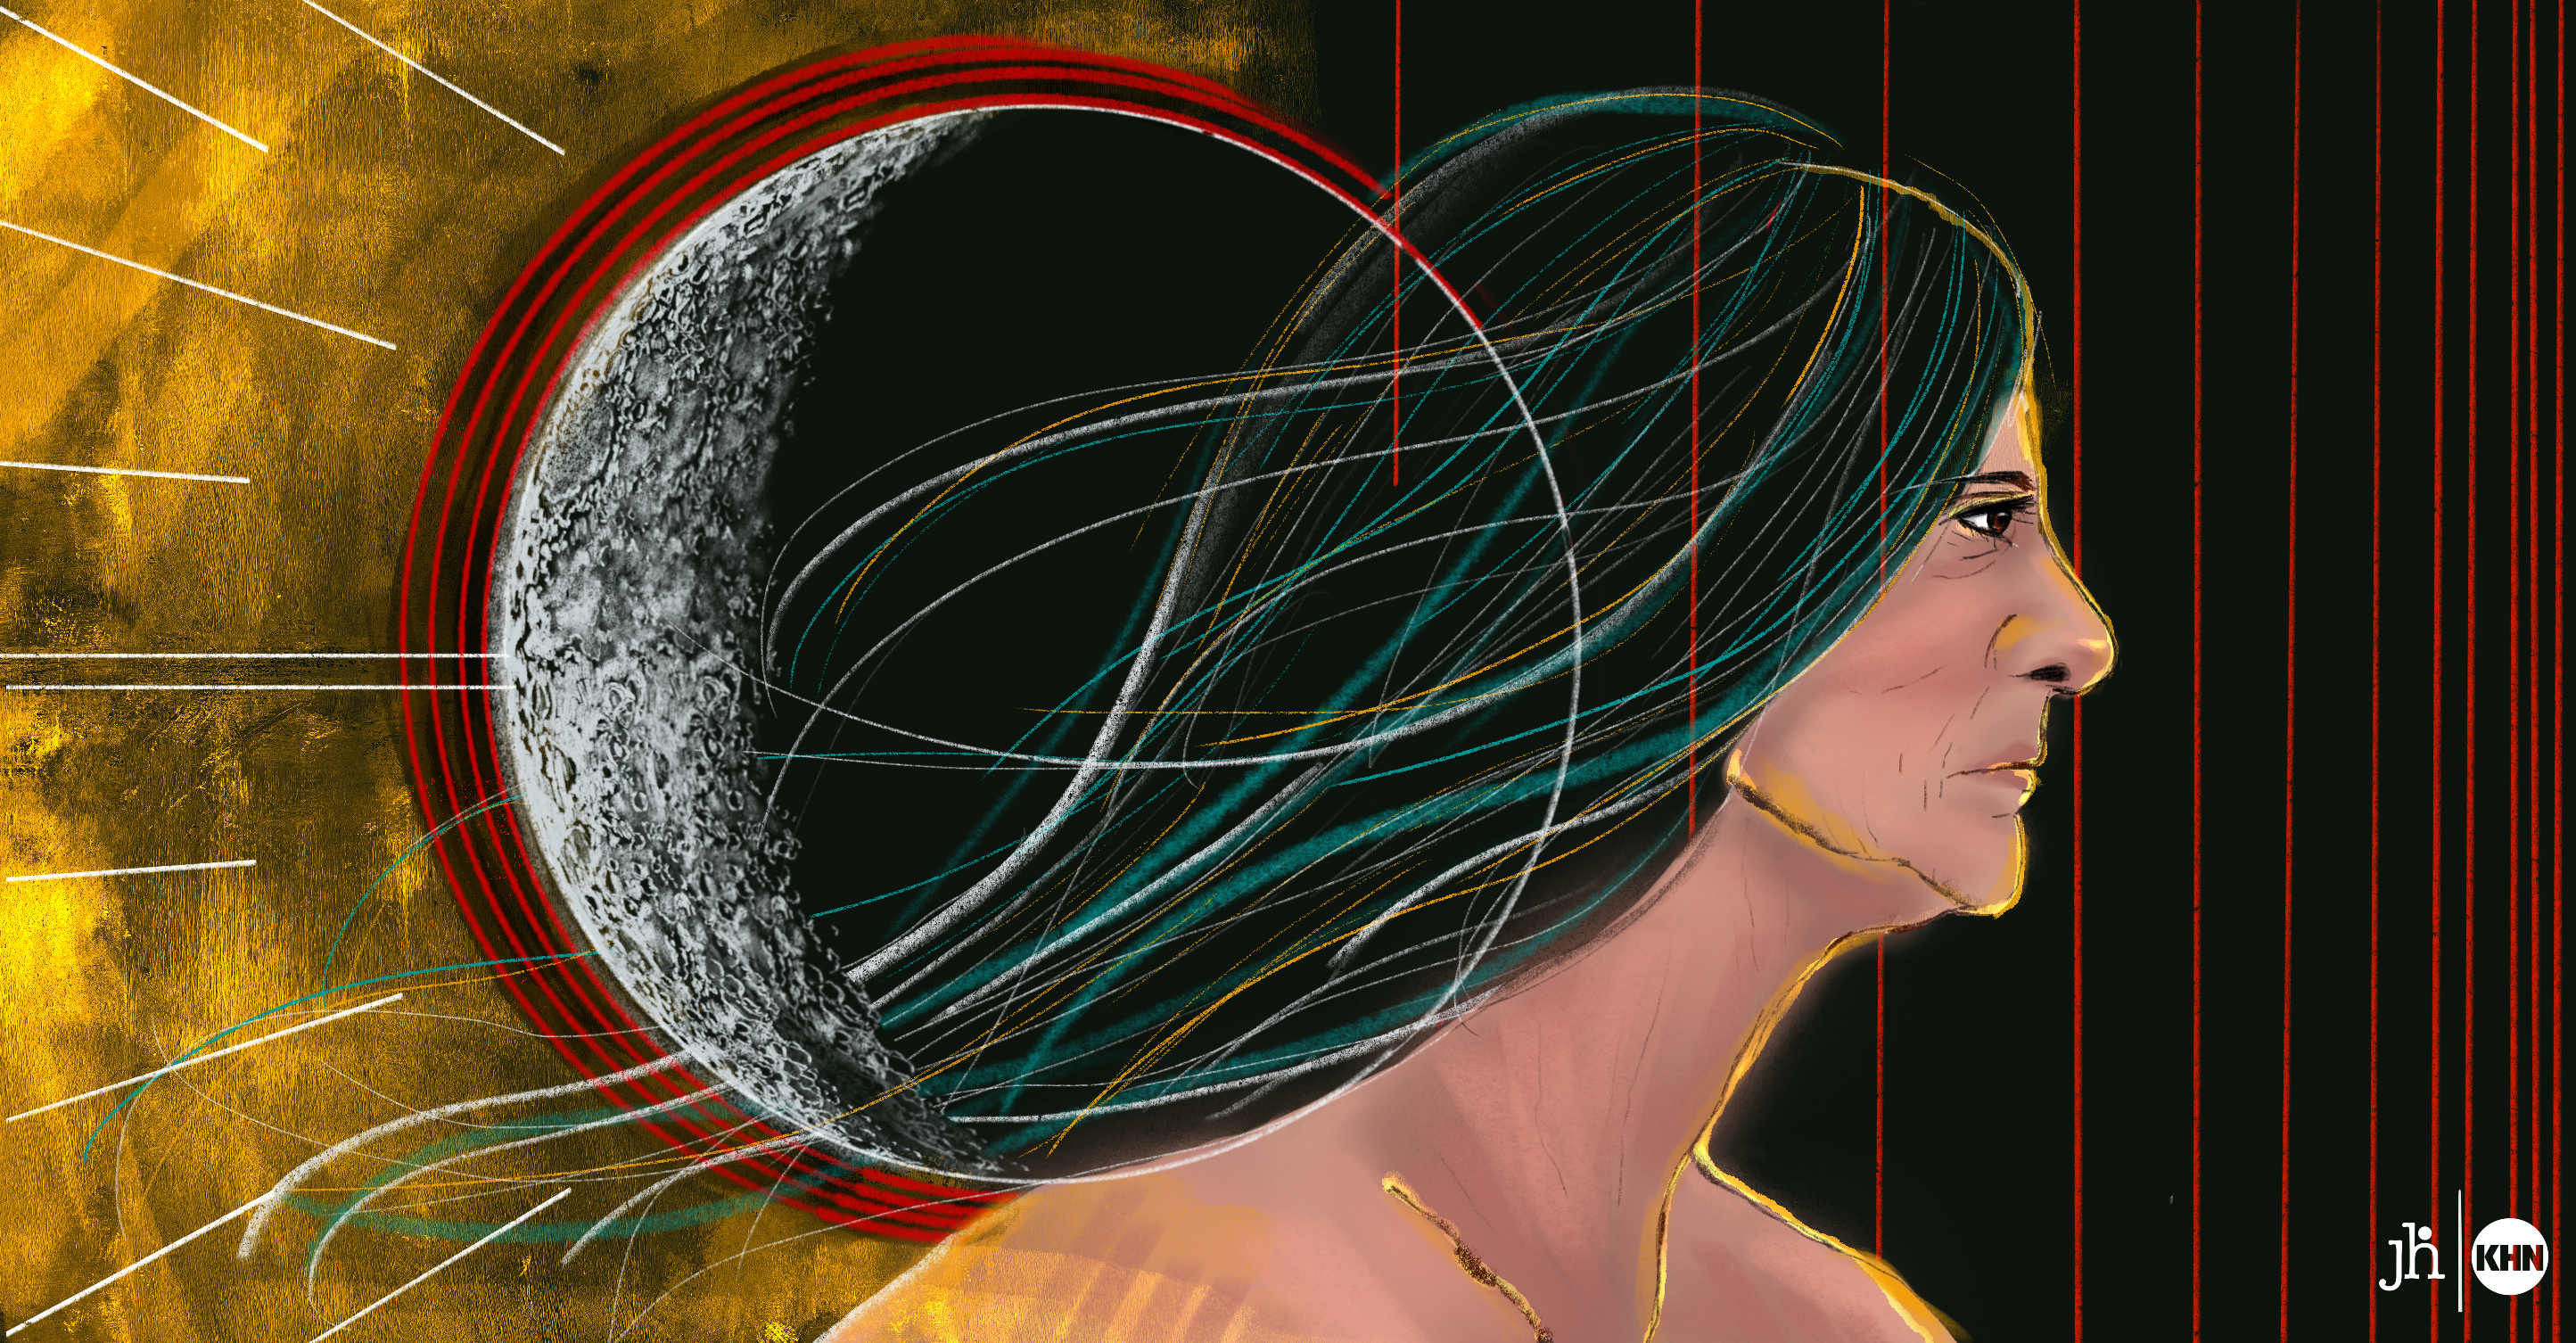 A digital illustration in watercolor and pencil. A white crescent moon overlaps with the right-facing profile of a Native American Woman. Thin, vertical red lines cover the right-hand side of the image, symbolic of bars in the legal system. On the left side of the image, a wash of gold highlights the moon, symbolic of hope.